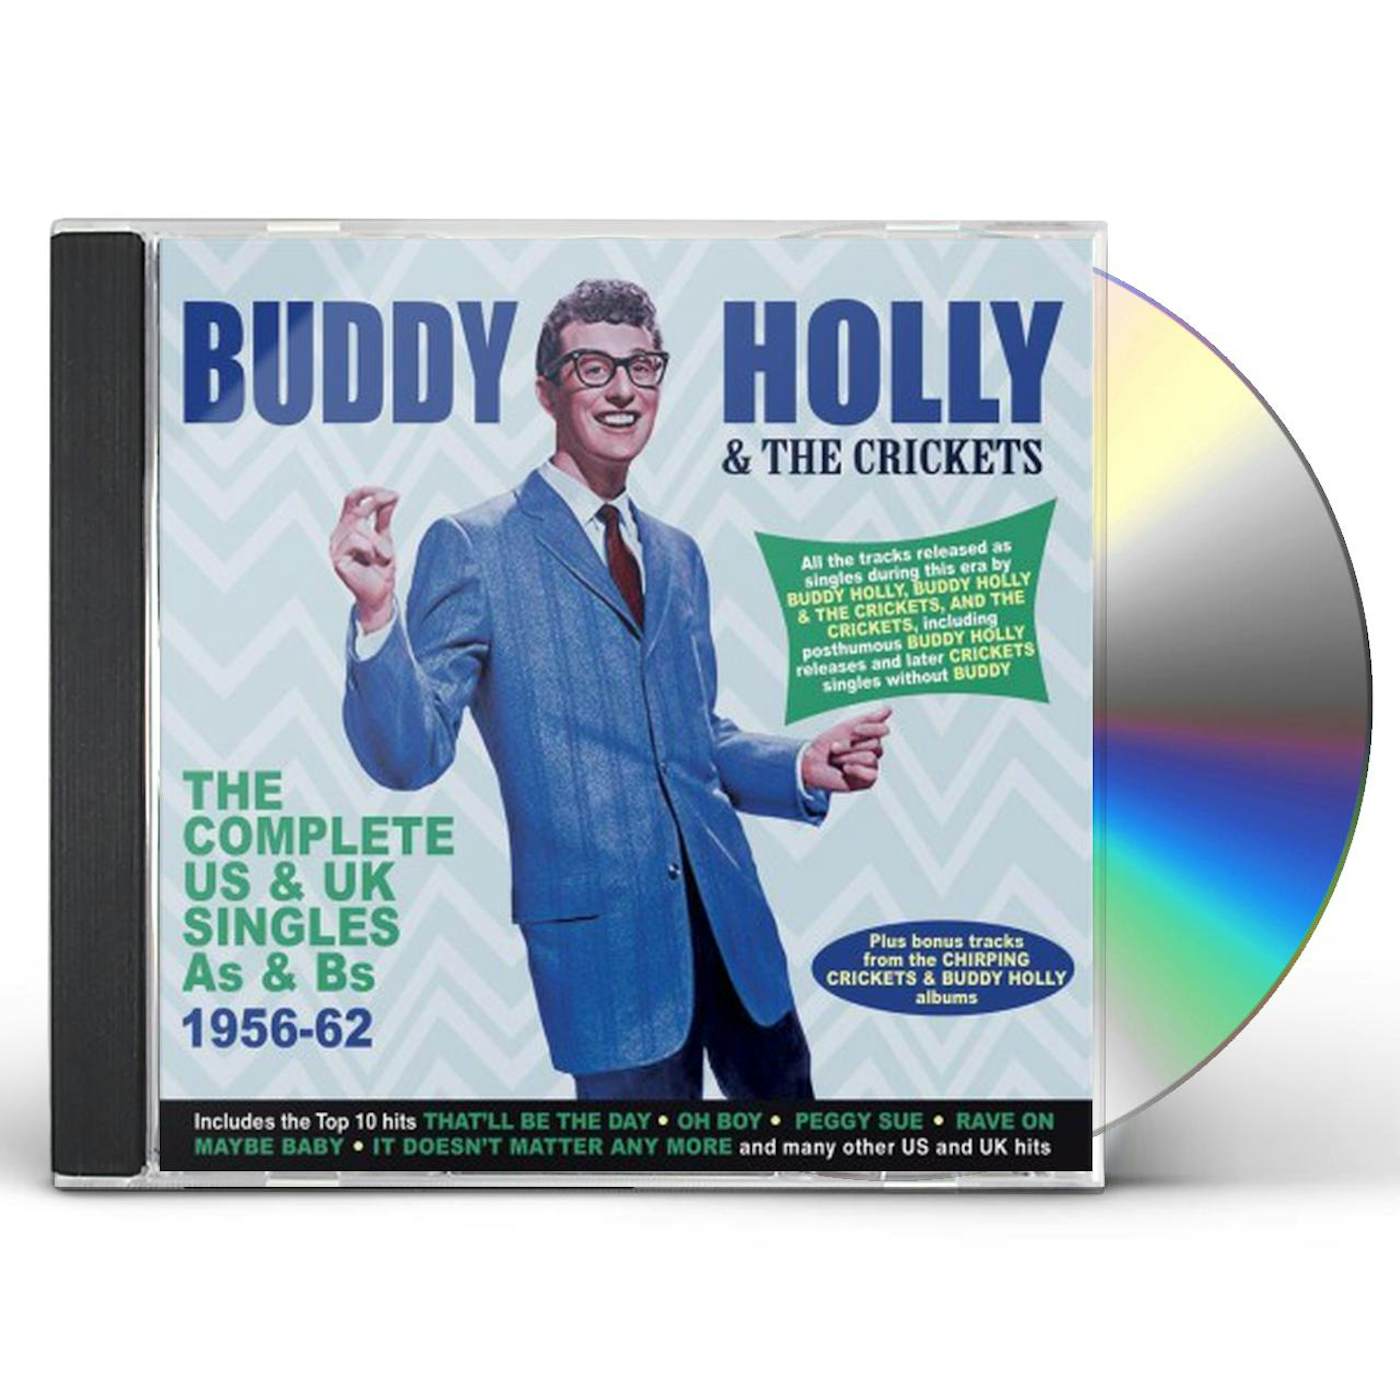 Buddy Holly & The Crickets COMPLETE US & UK SINGLES AS & BS 1956-62 CD